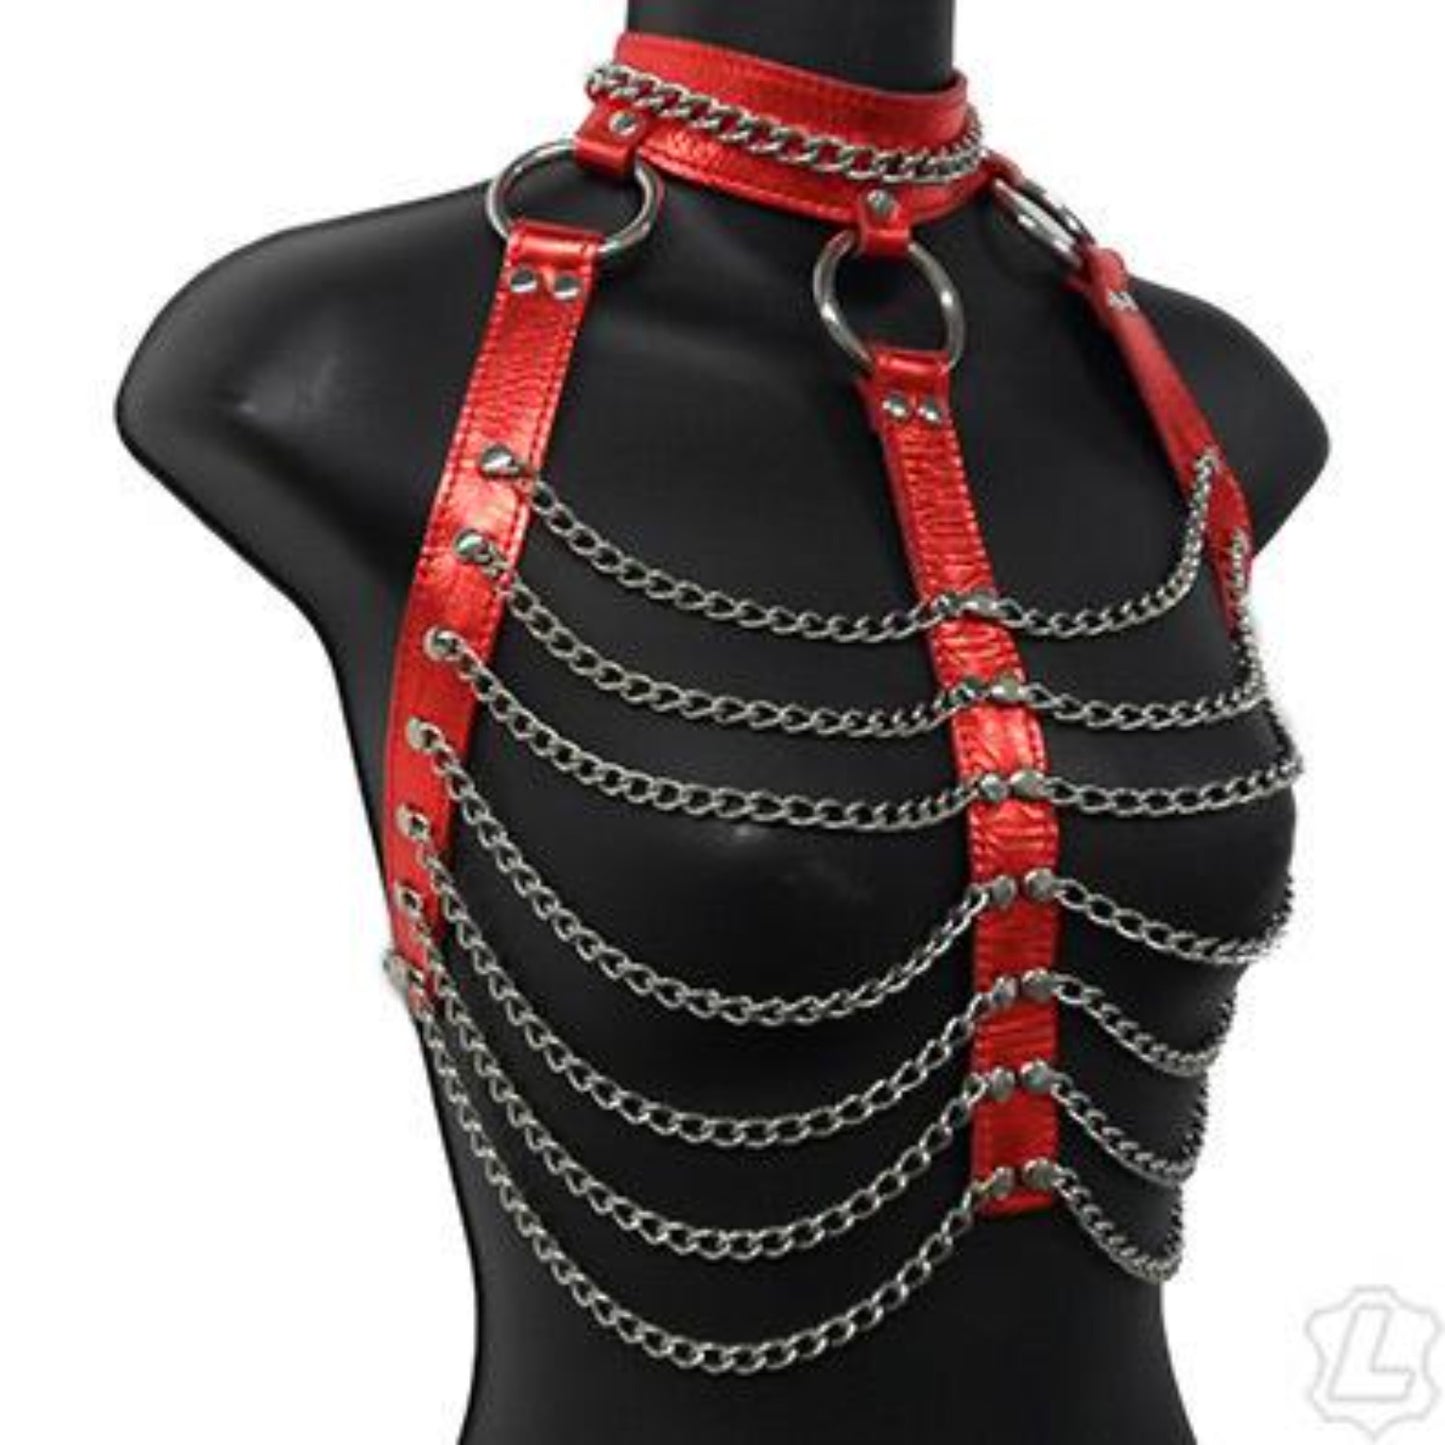 The red leather and chain three column halter harness on a mannequin.